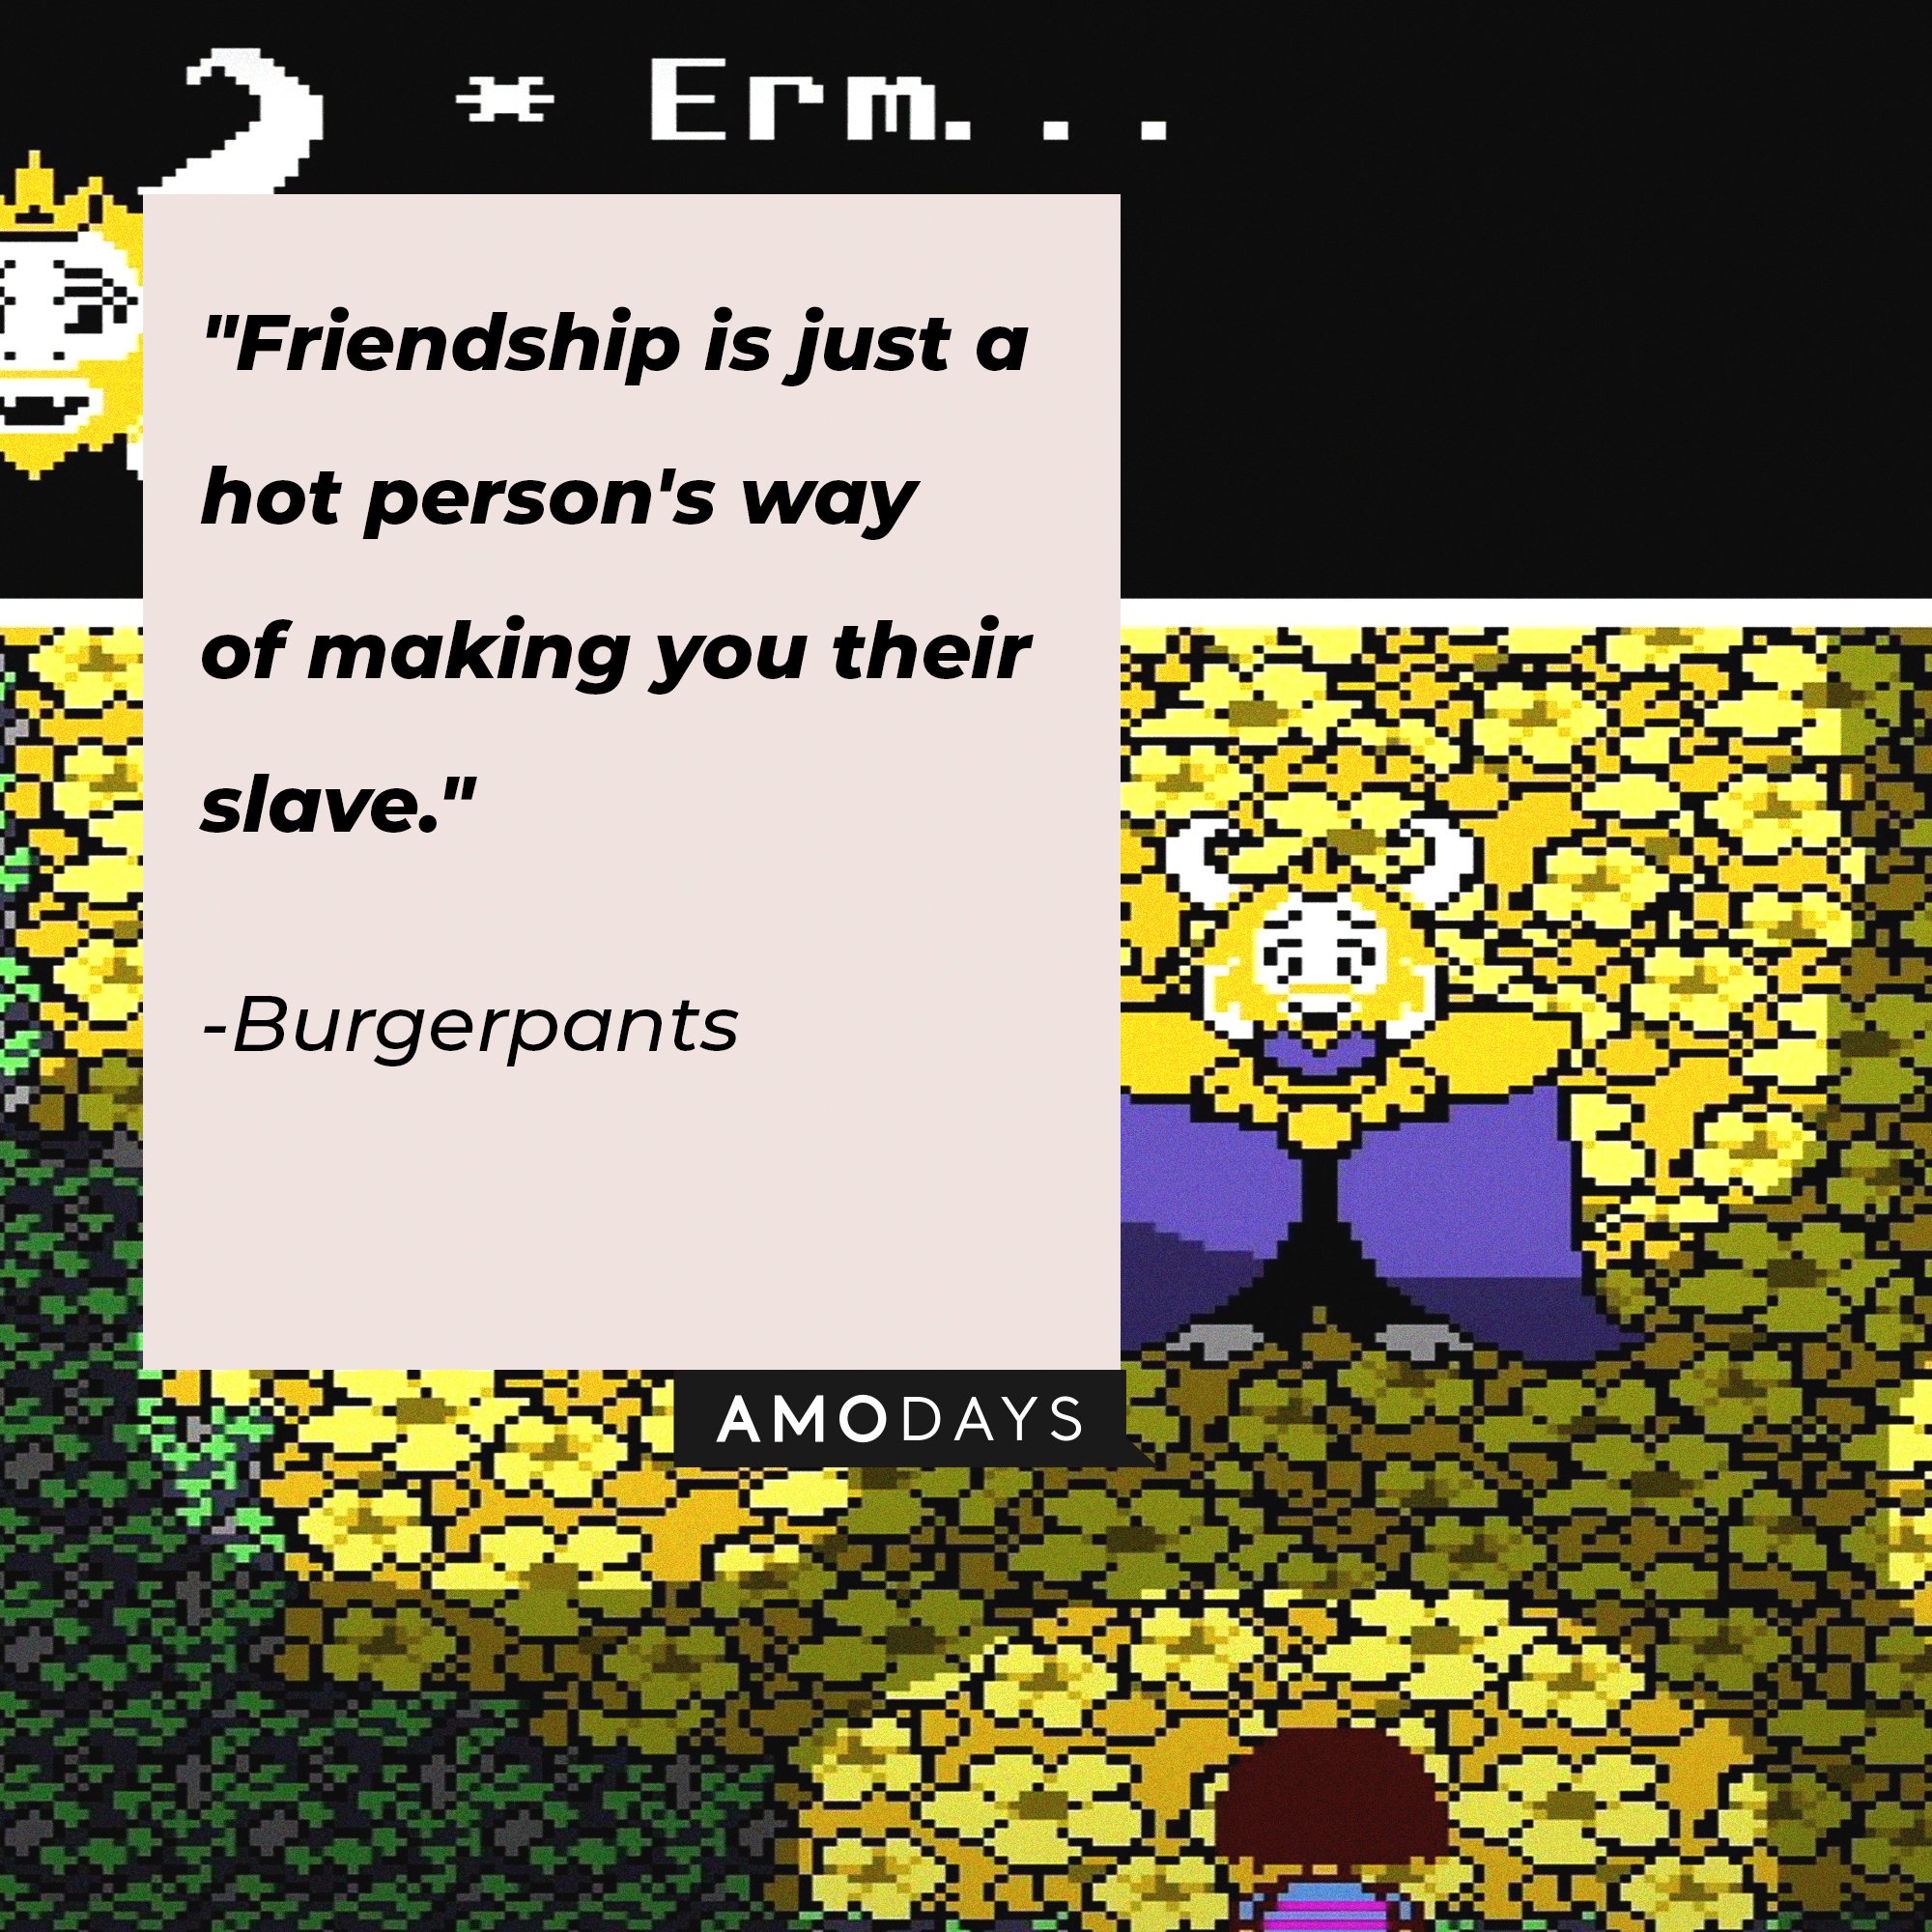 Burgerpants’ quote: "Friendship is just a hot person's way of making you their slave." | Image: AmoDays